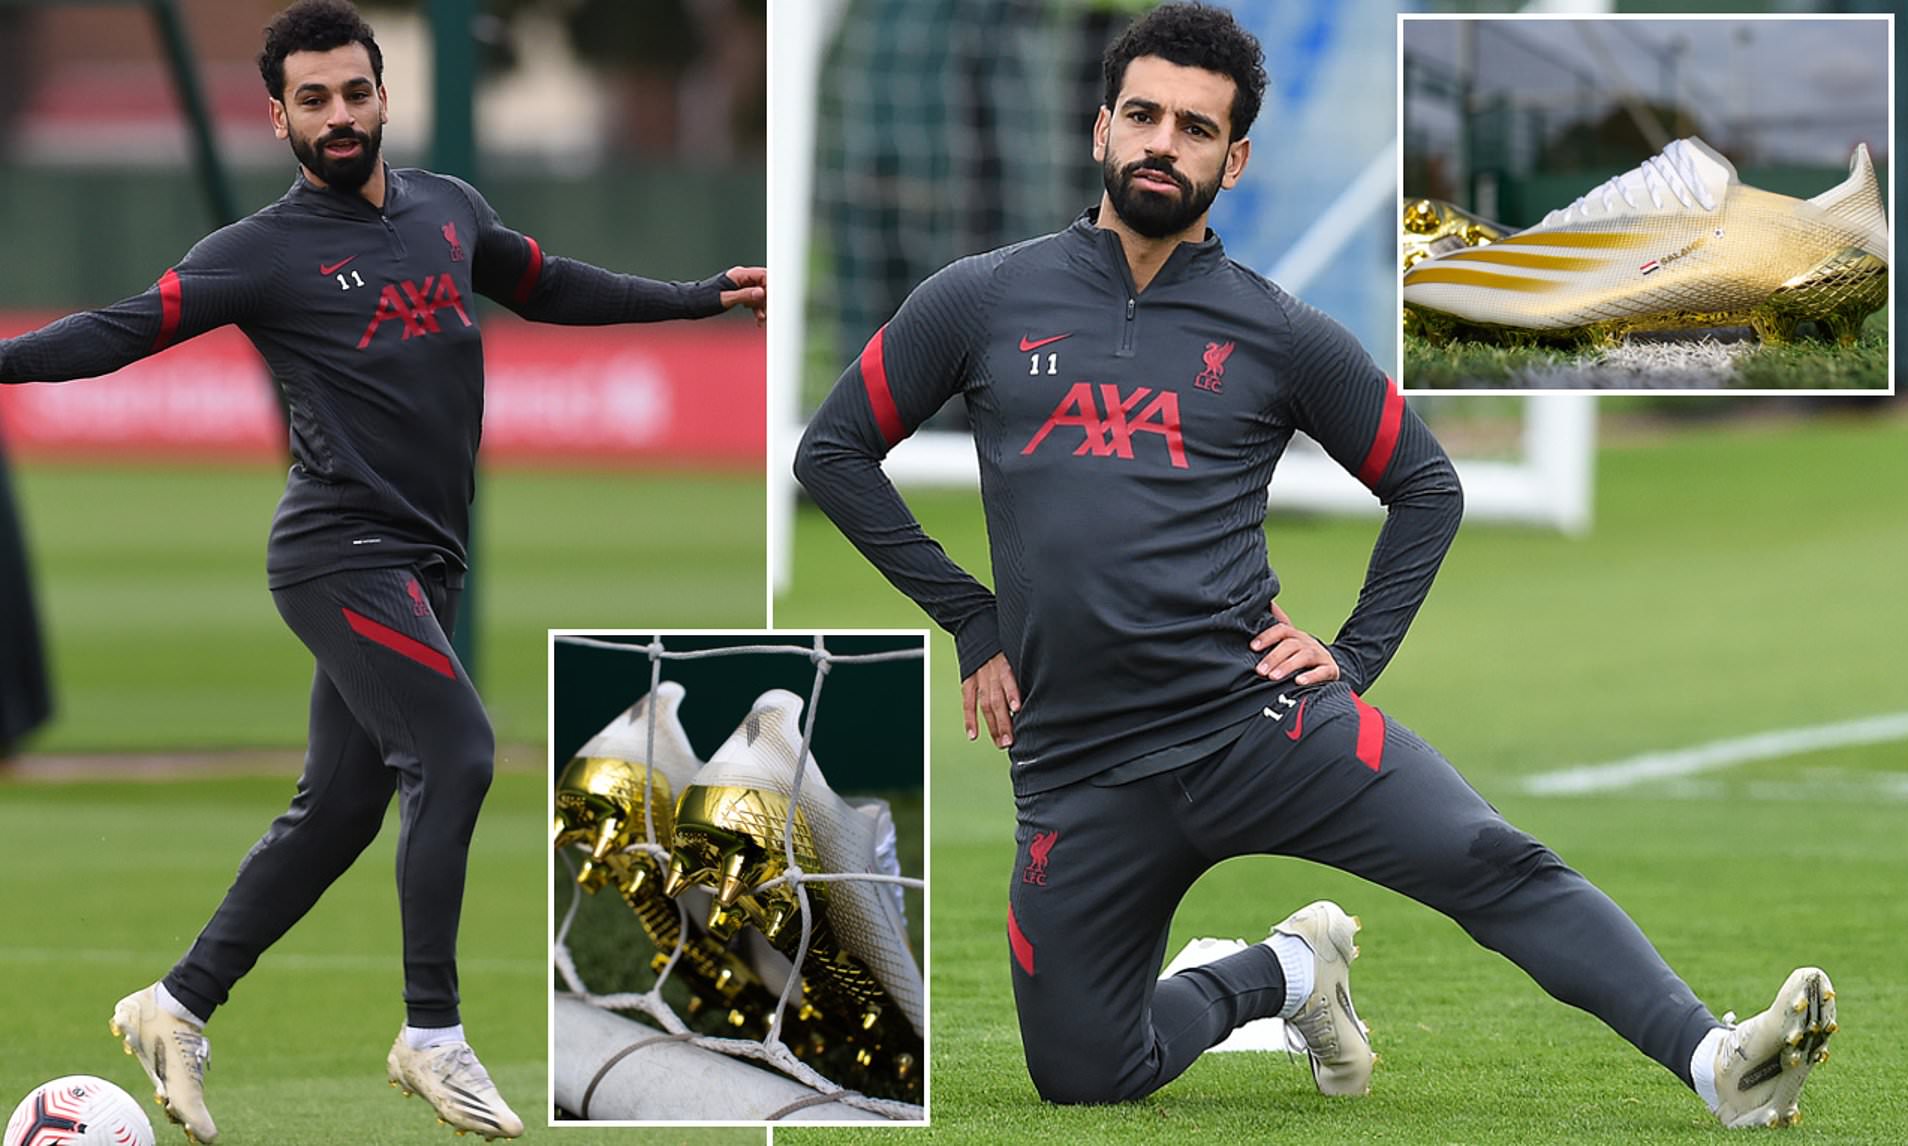 Mo Salah to wear special golden boots 